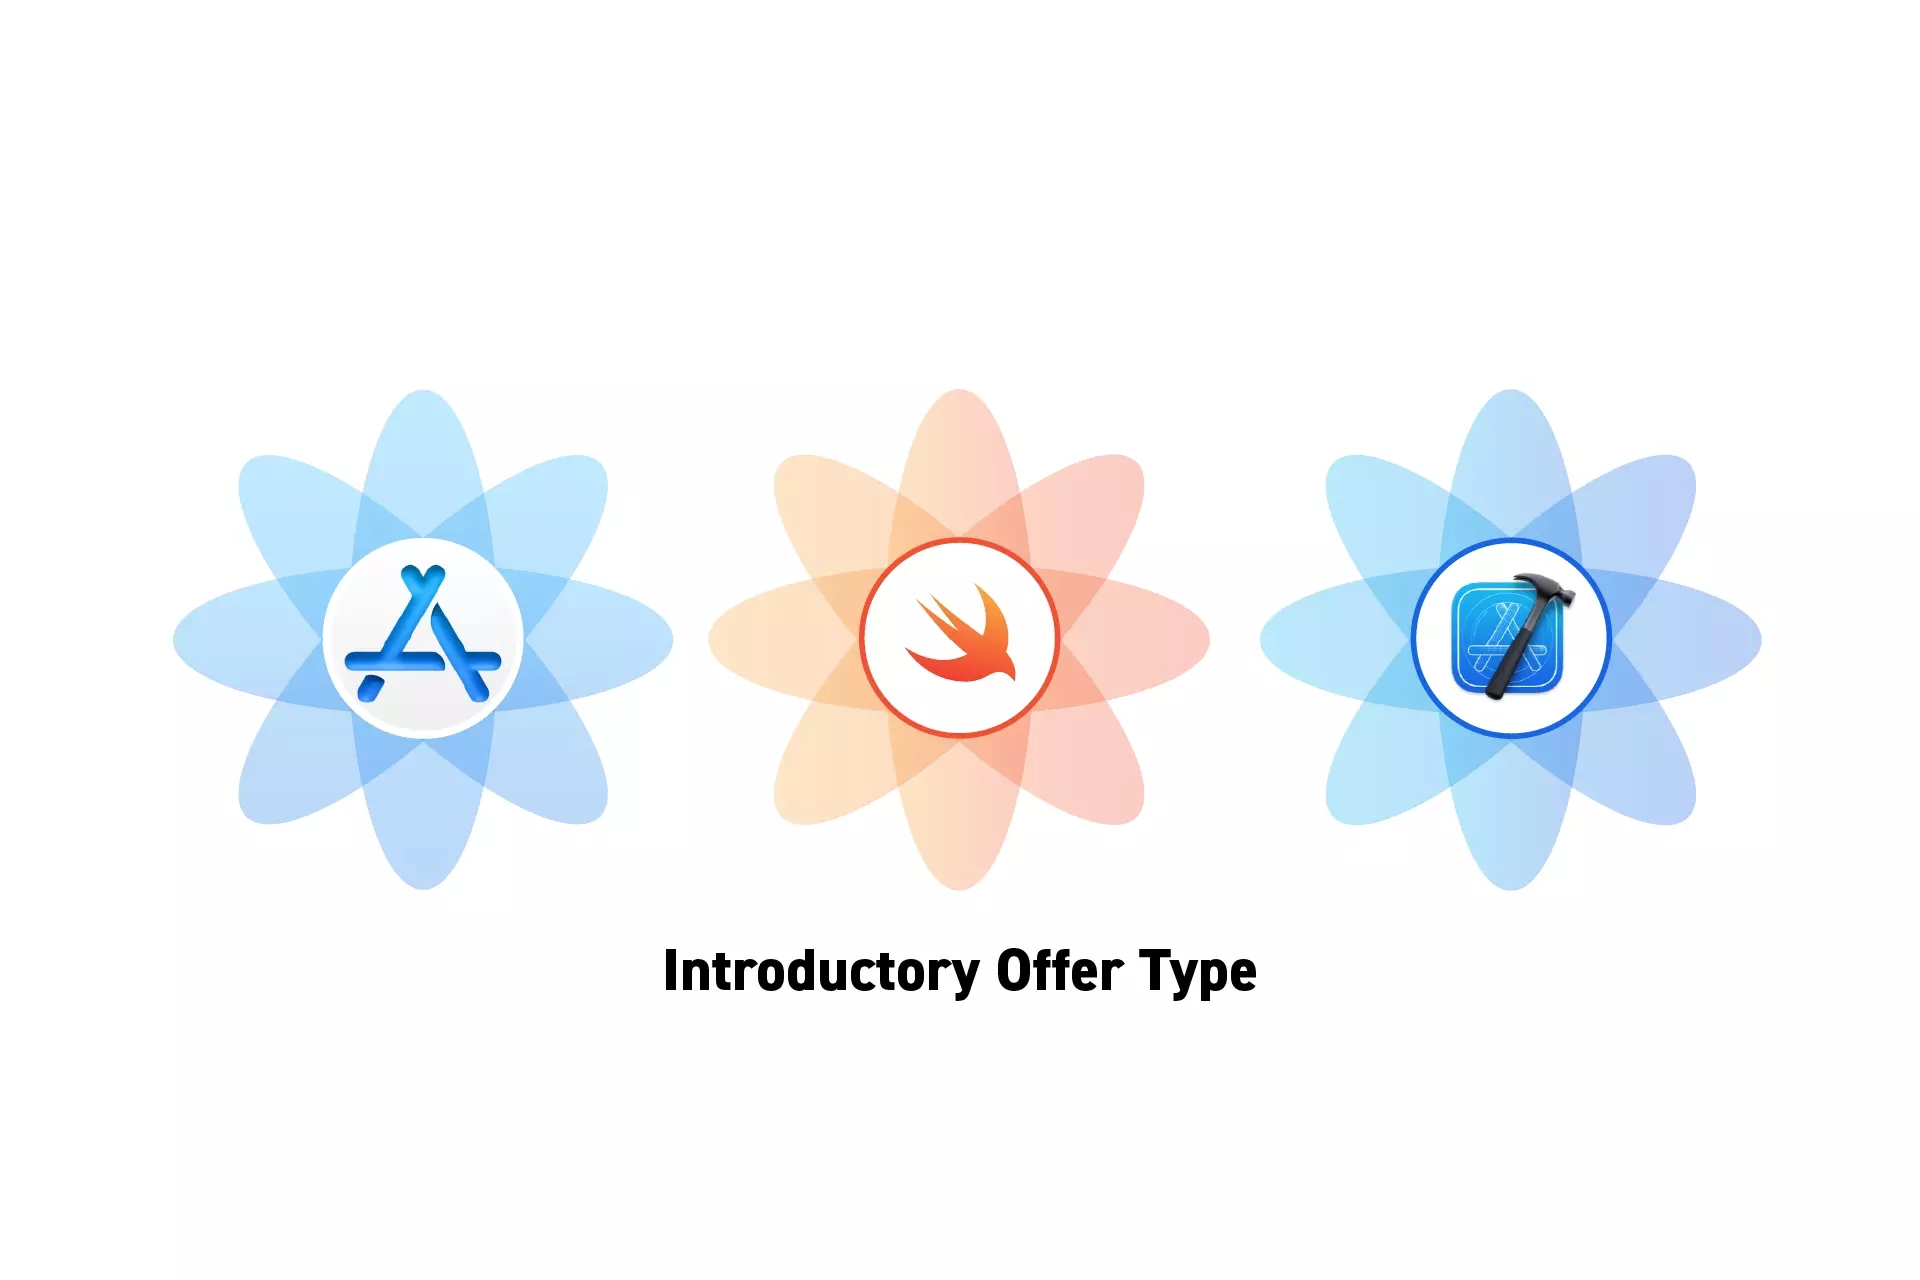 Three flowers that represent StoreKit, Swift and XCode side by side. Beneath them sits the text “Introductory Offer Type.”